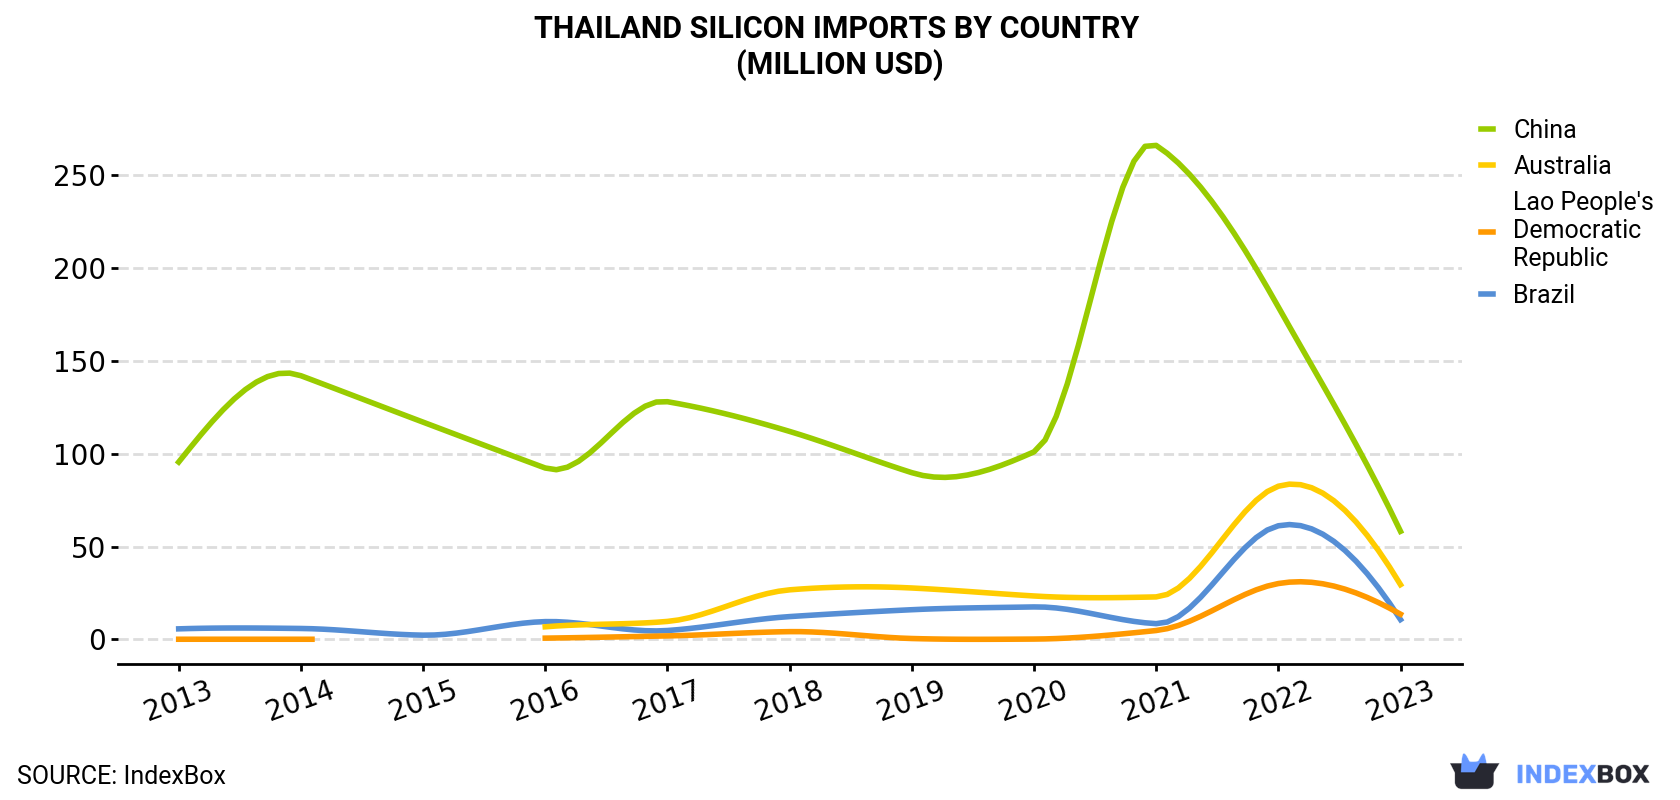 Thailand Silicon Imports By Country (Million USD)